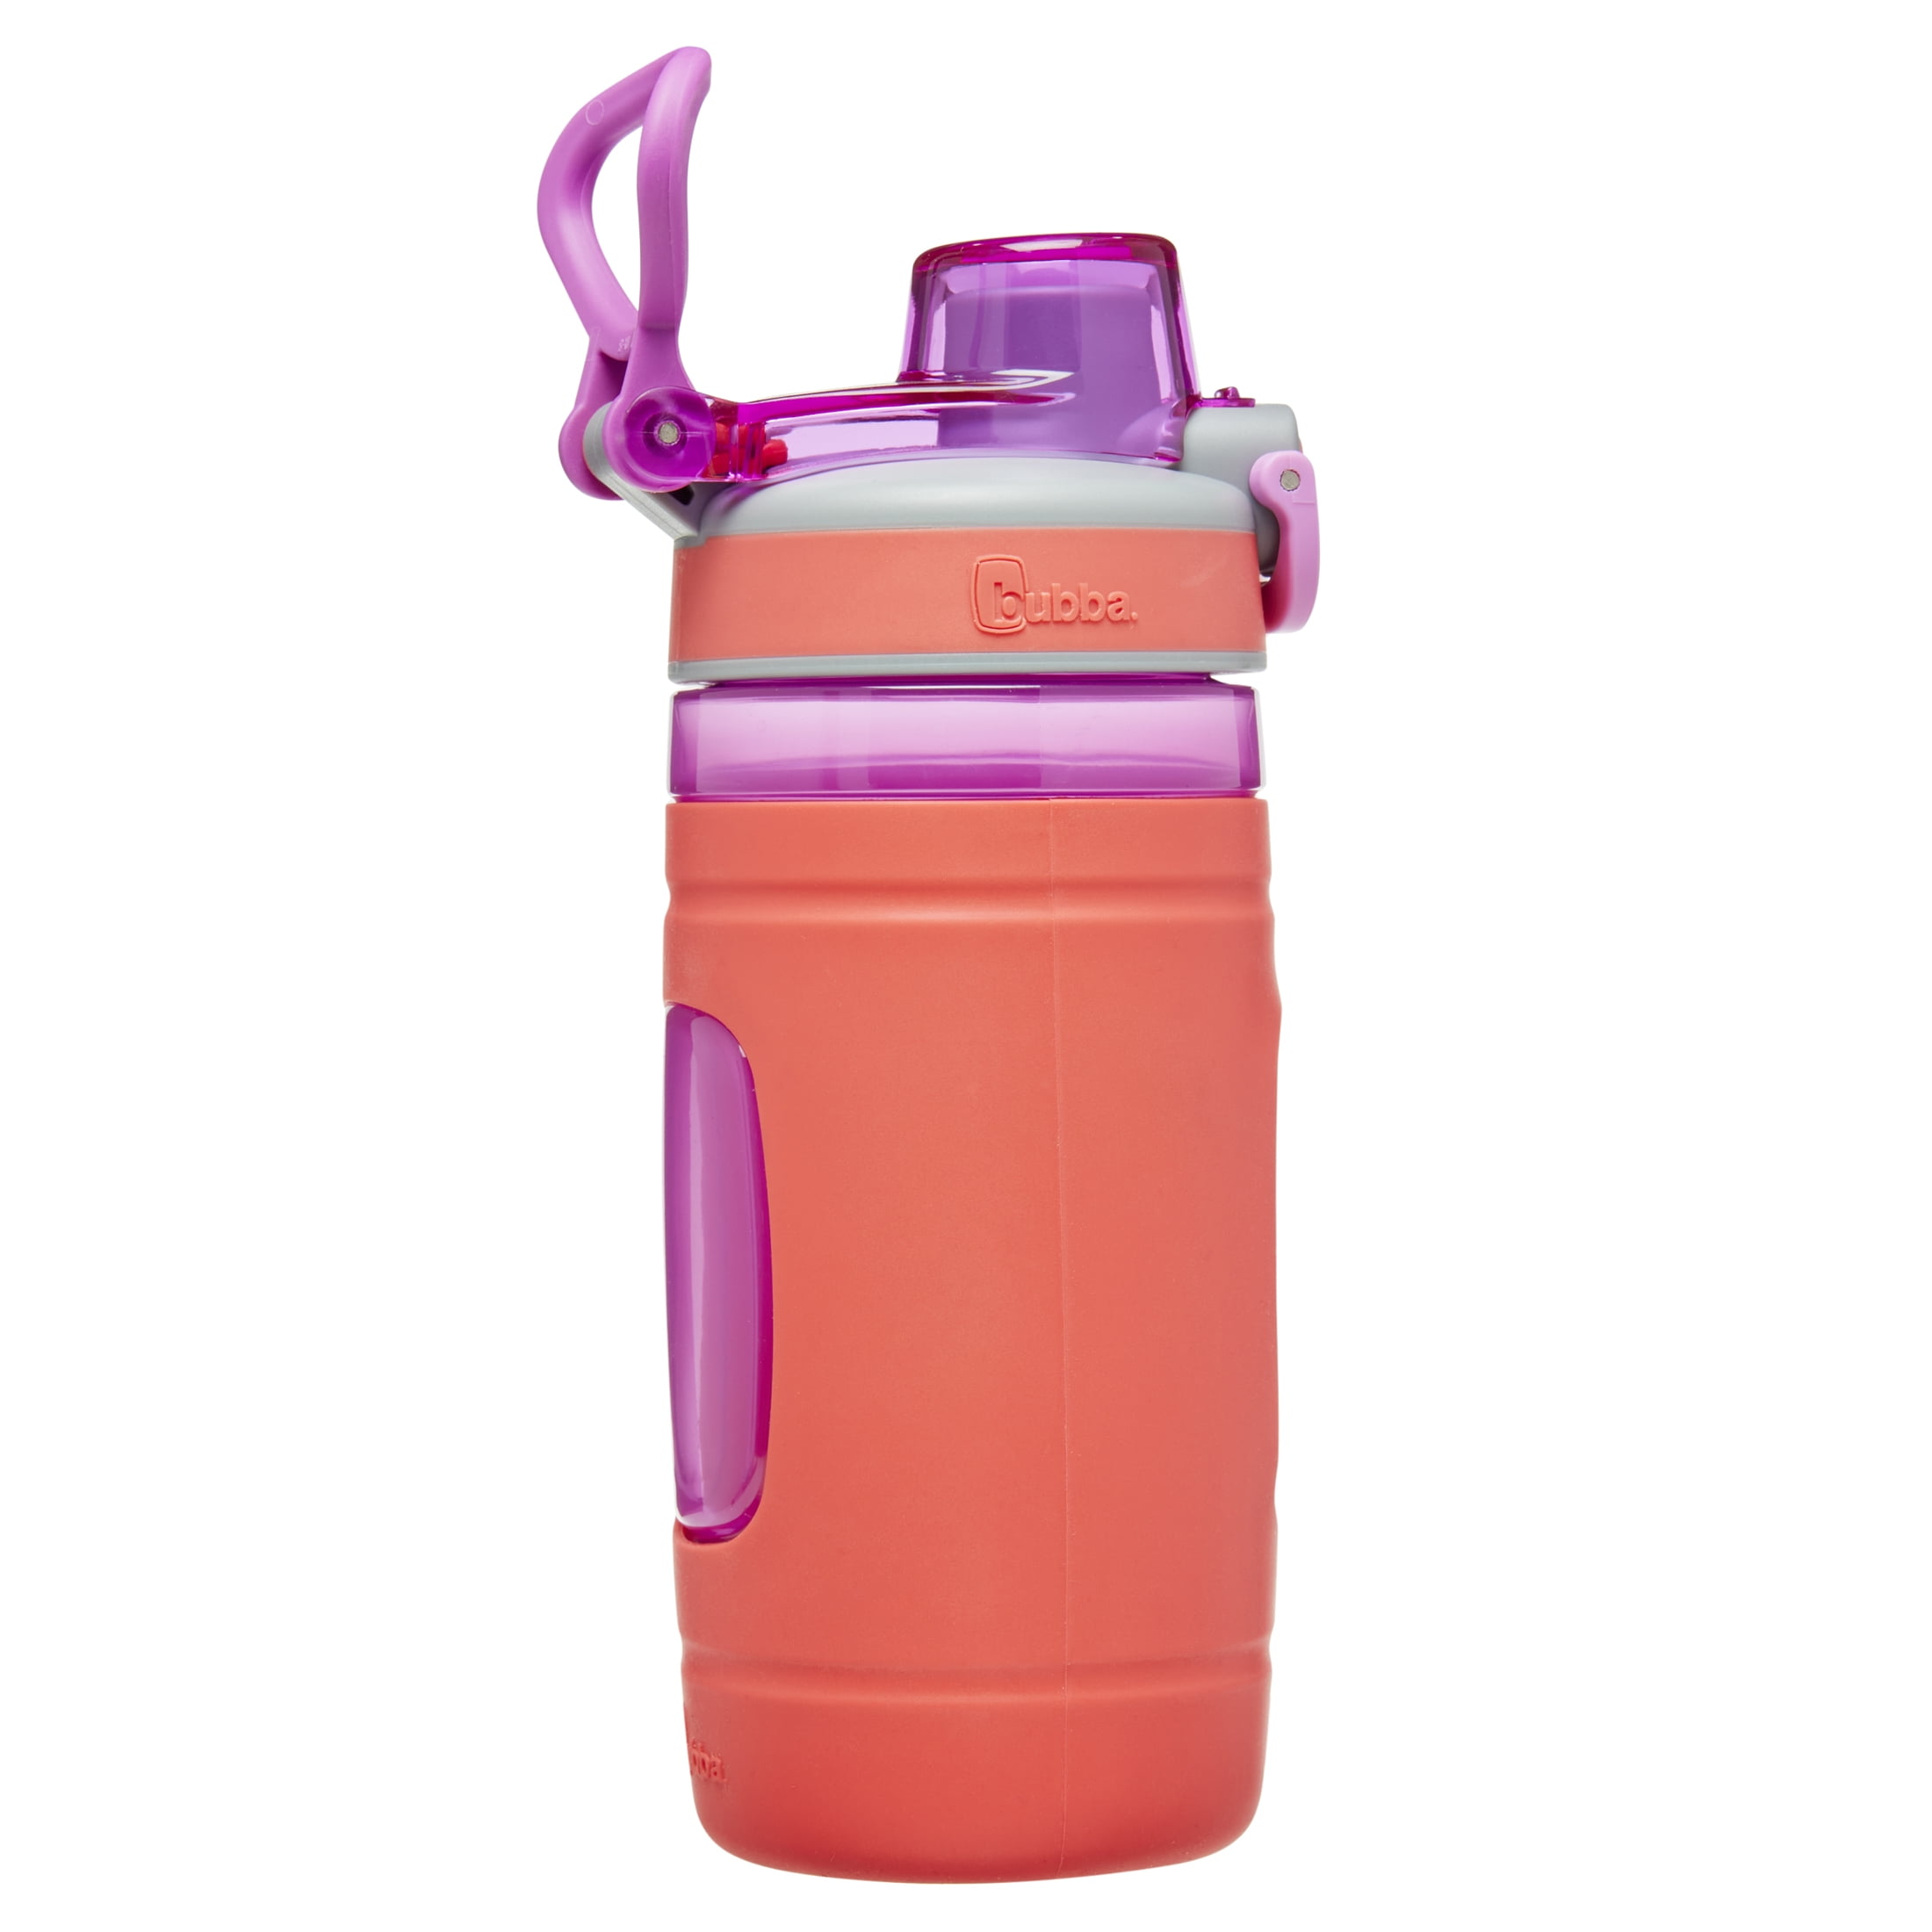 Bubba Flo Kids 16 Oz Aqua and Gray Plastic Water Bottle with Wide Mouth Lid